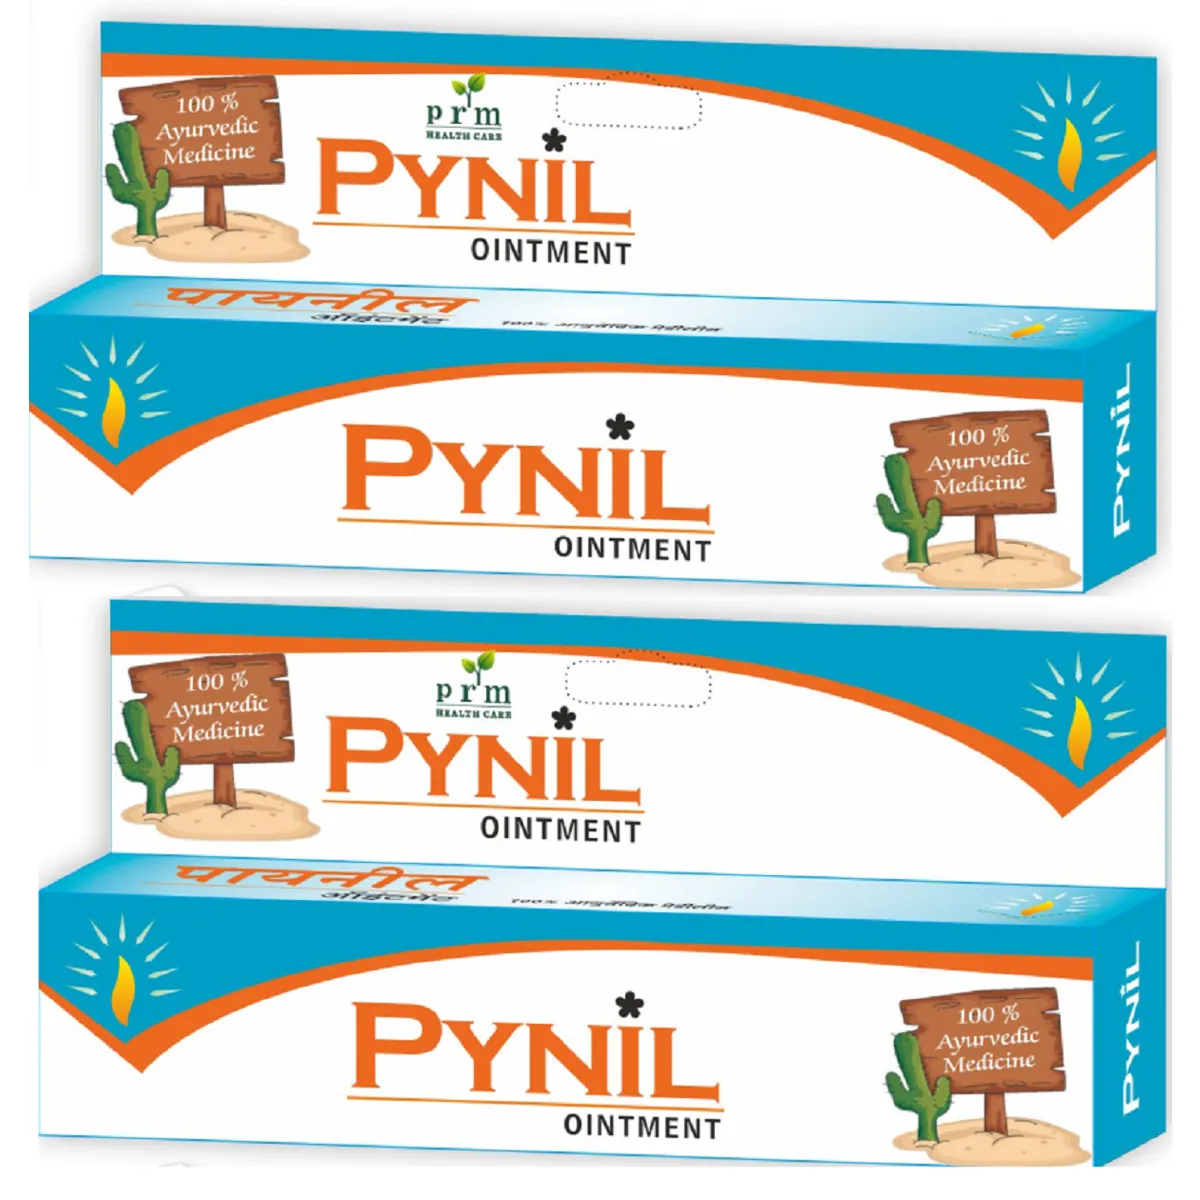 Prm Pynil Ointment Cream 30g, Pack of 2